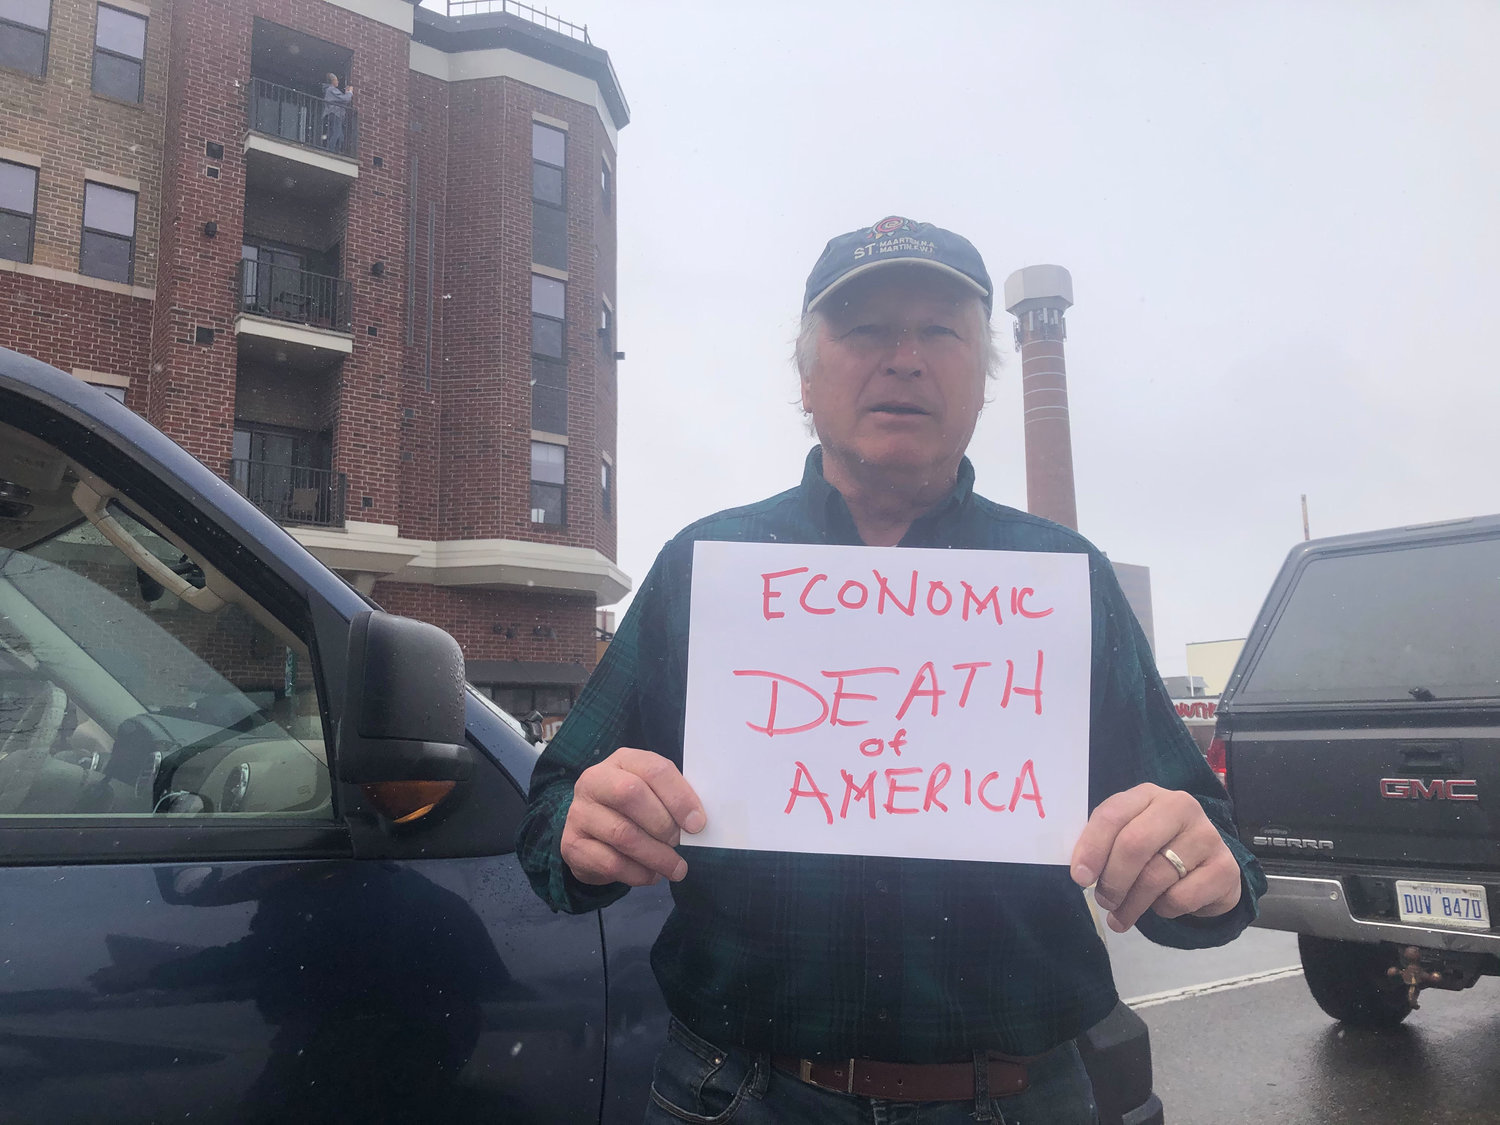 A man at today's protest with a sign reading "Economic Death of America."